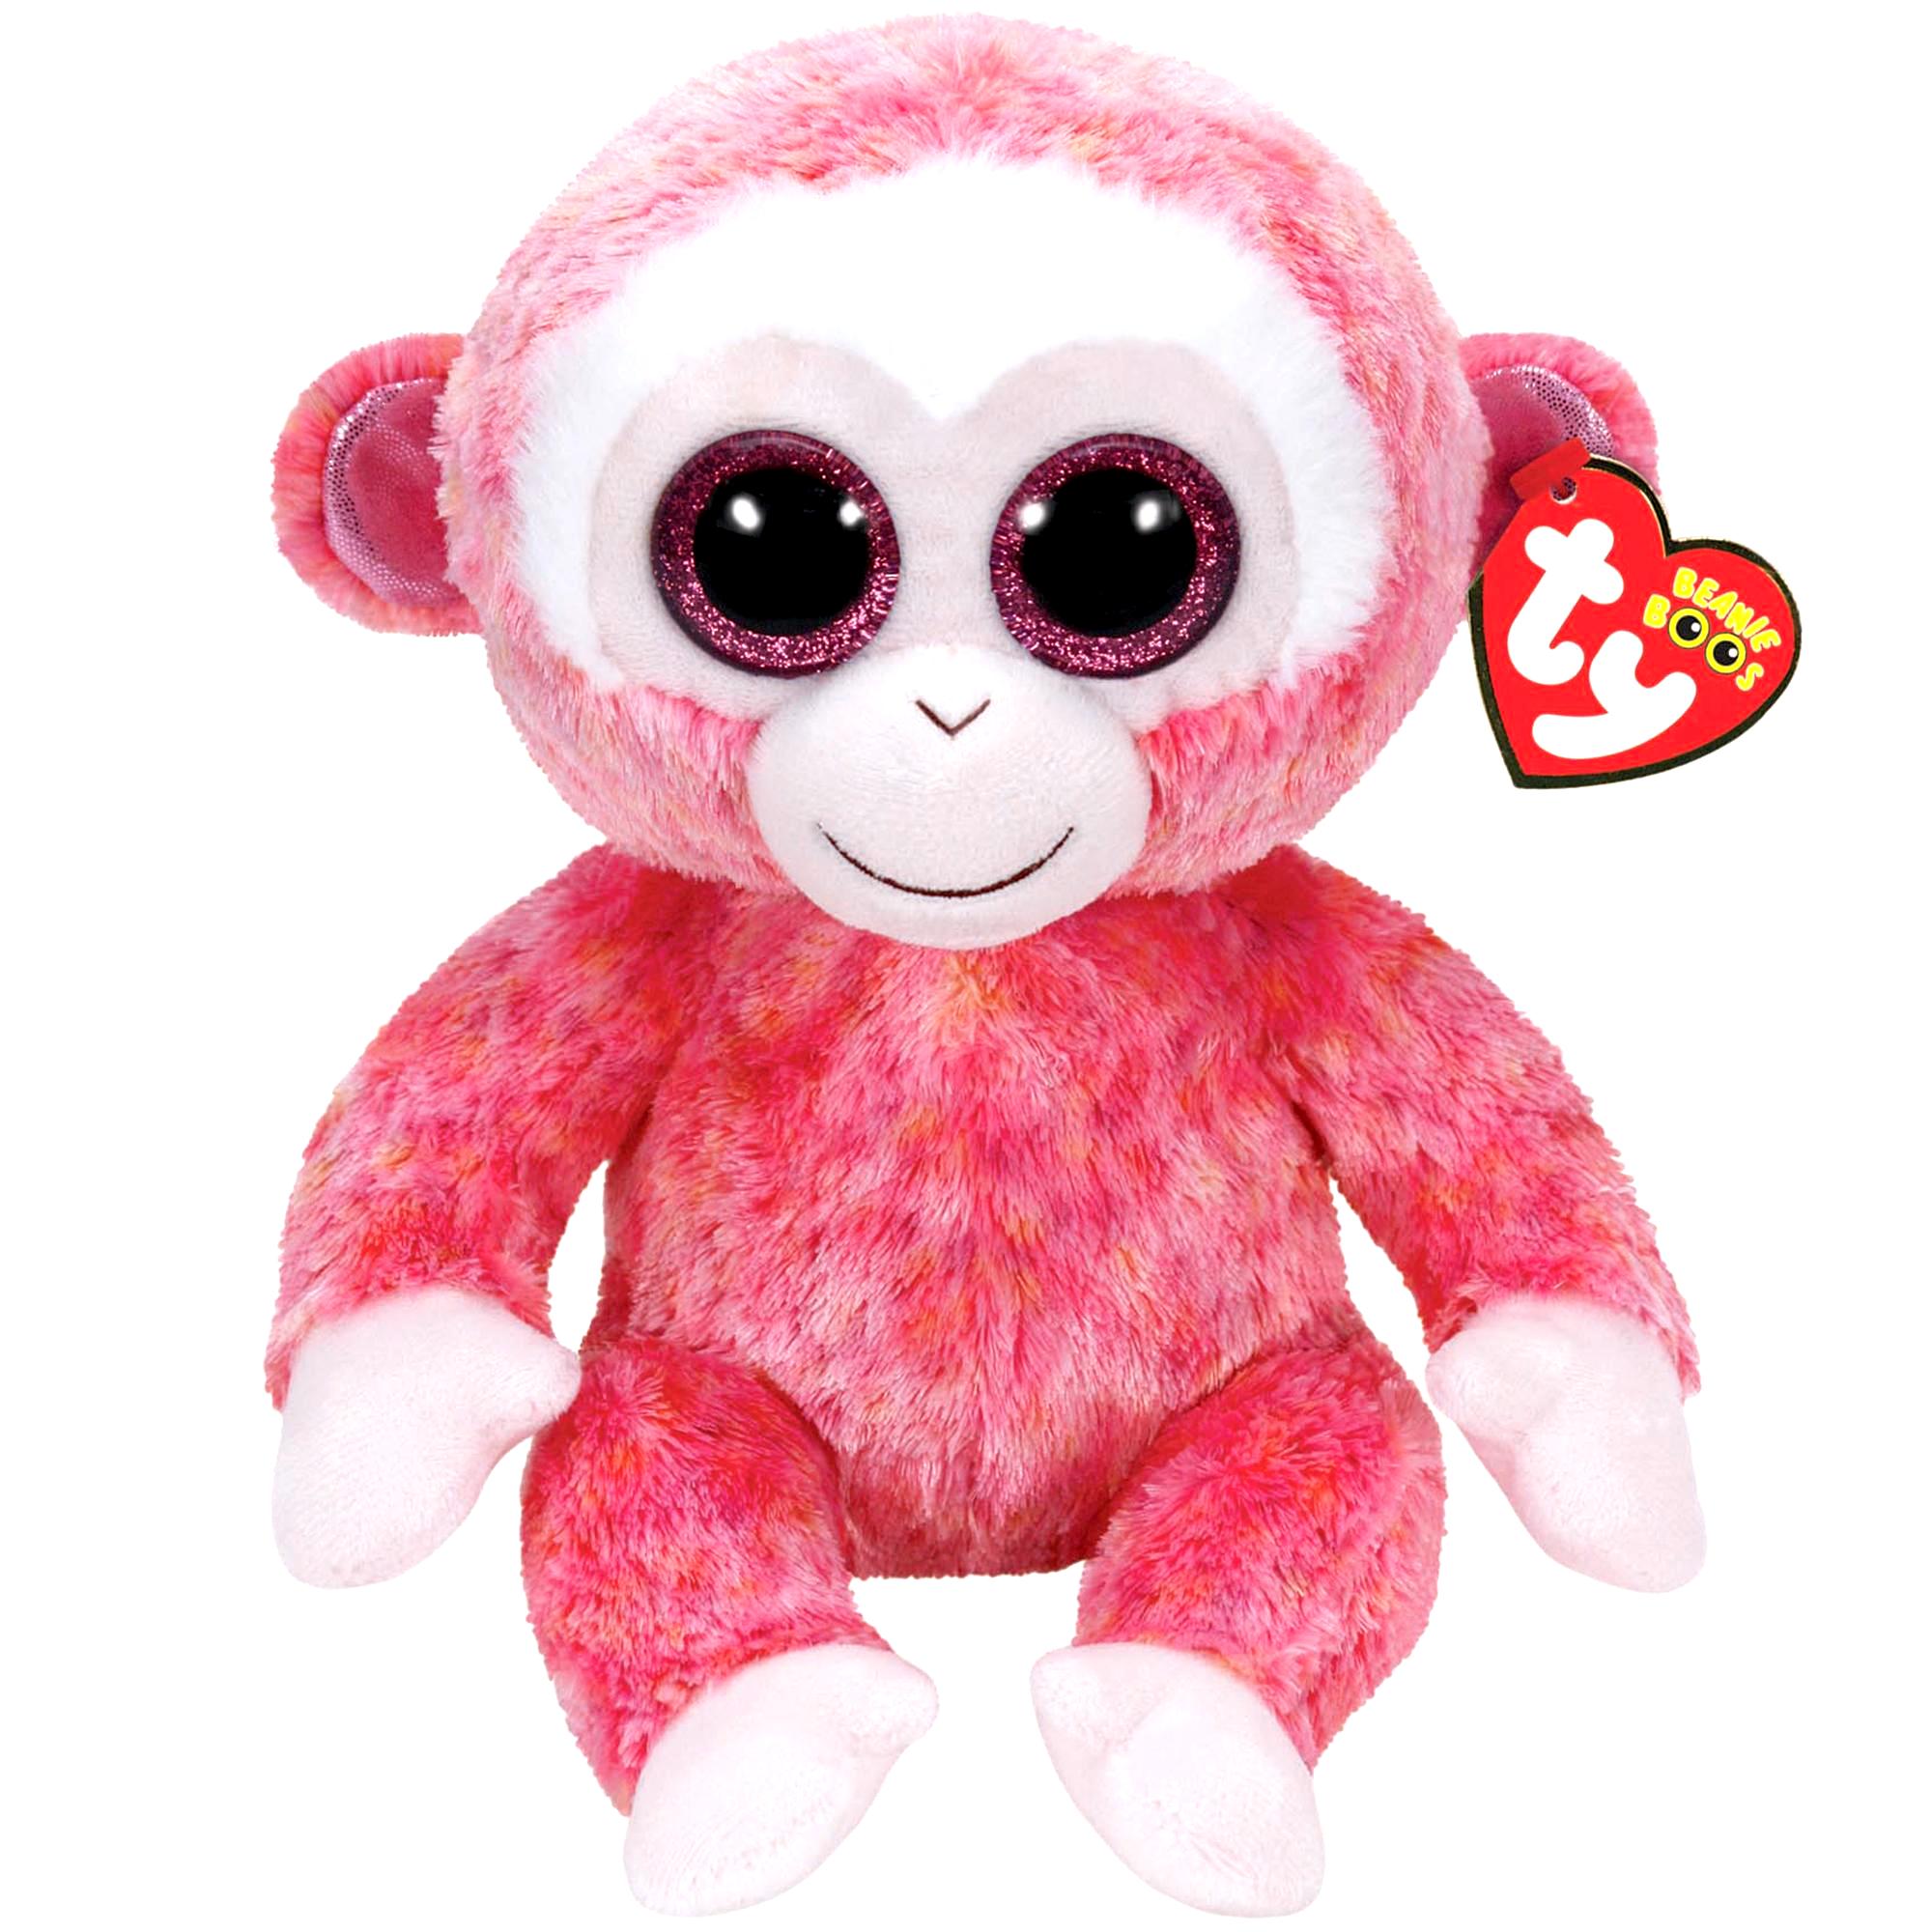 RUBY the 6" MONKEY TY BEANIE BOOS BOO'S MINT with MINT TAG 